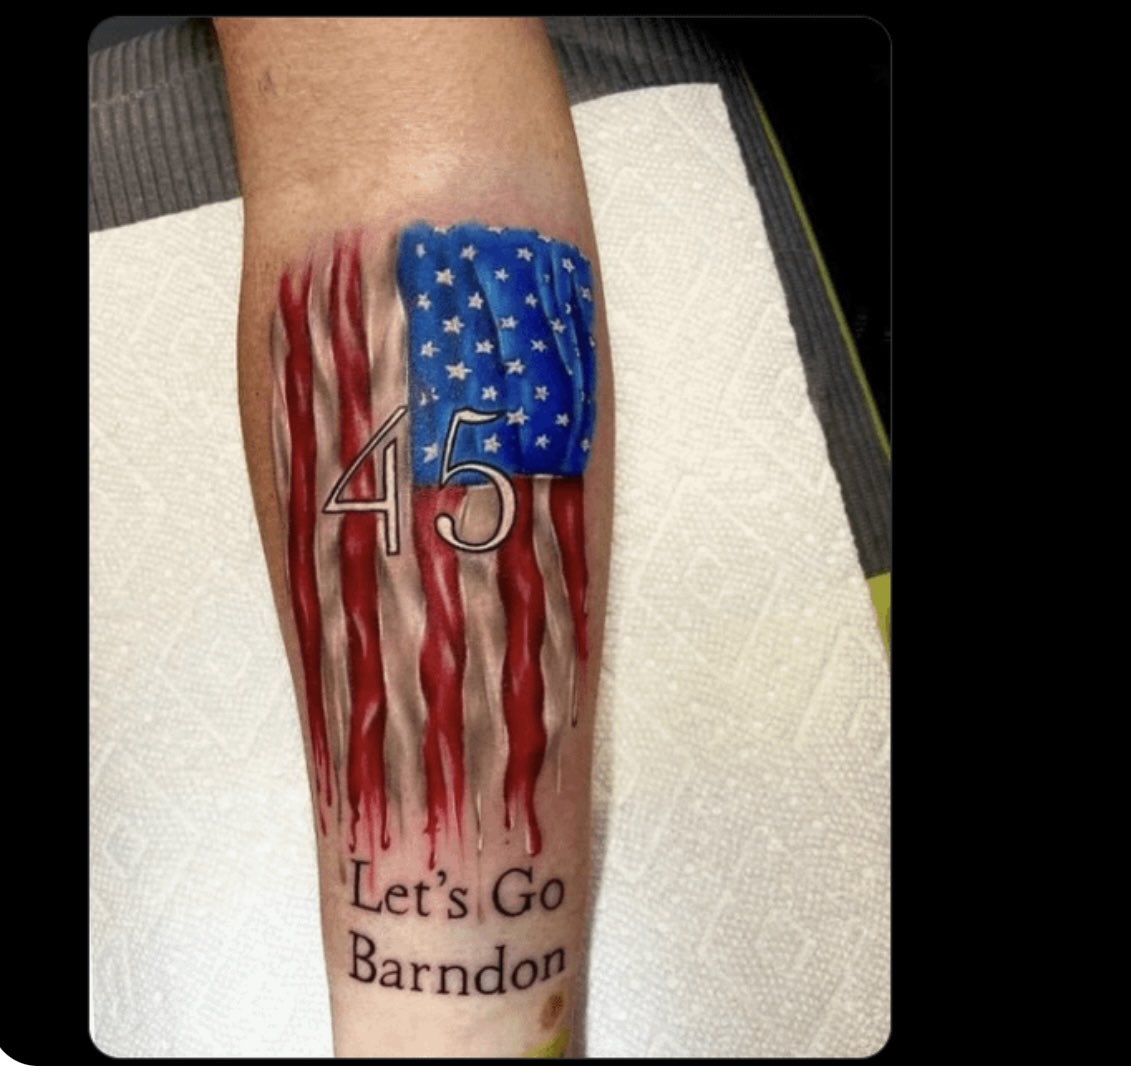 He decided to own the libs with a new tat.